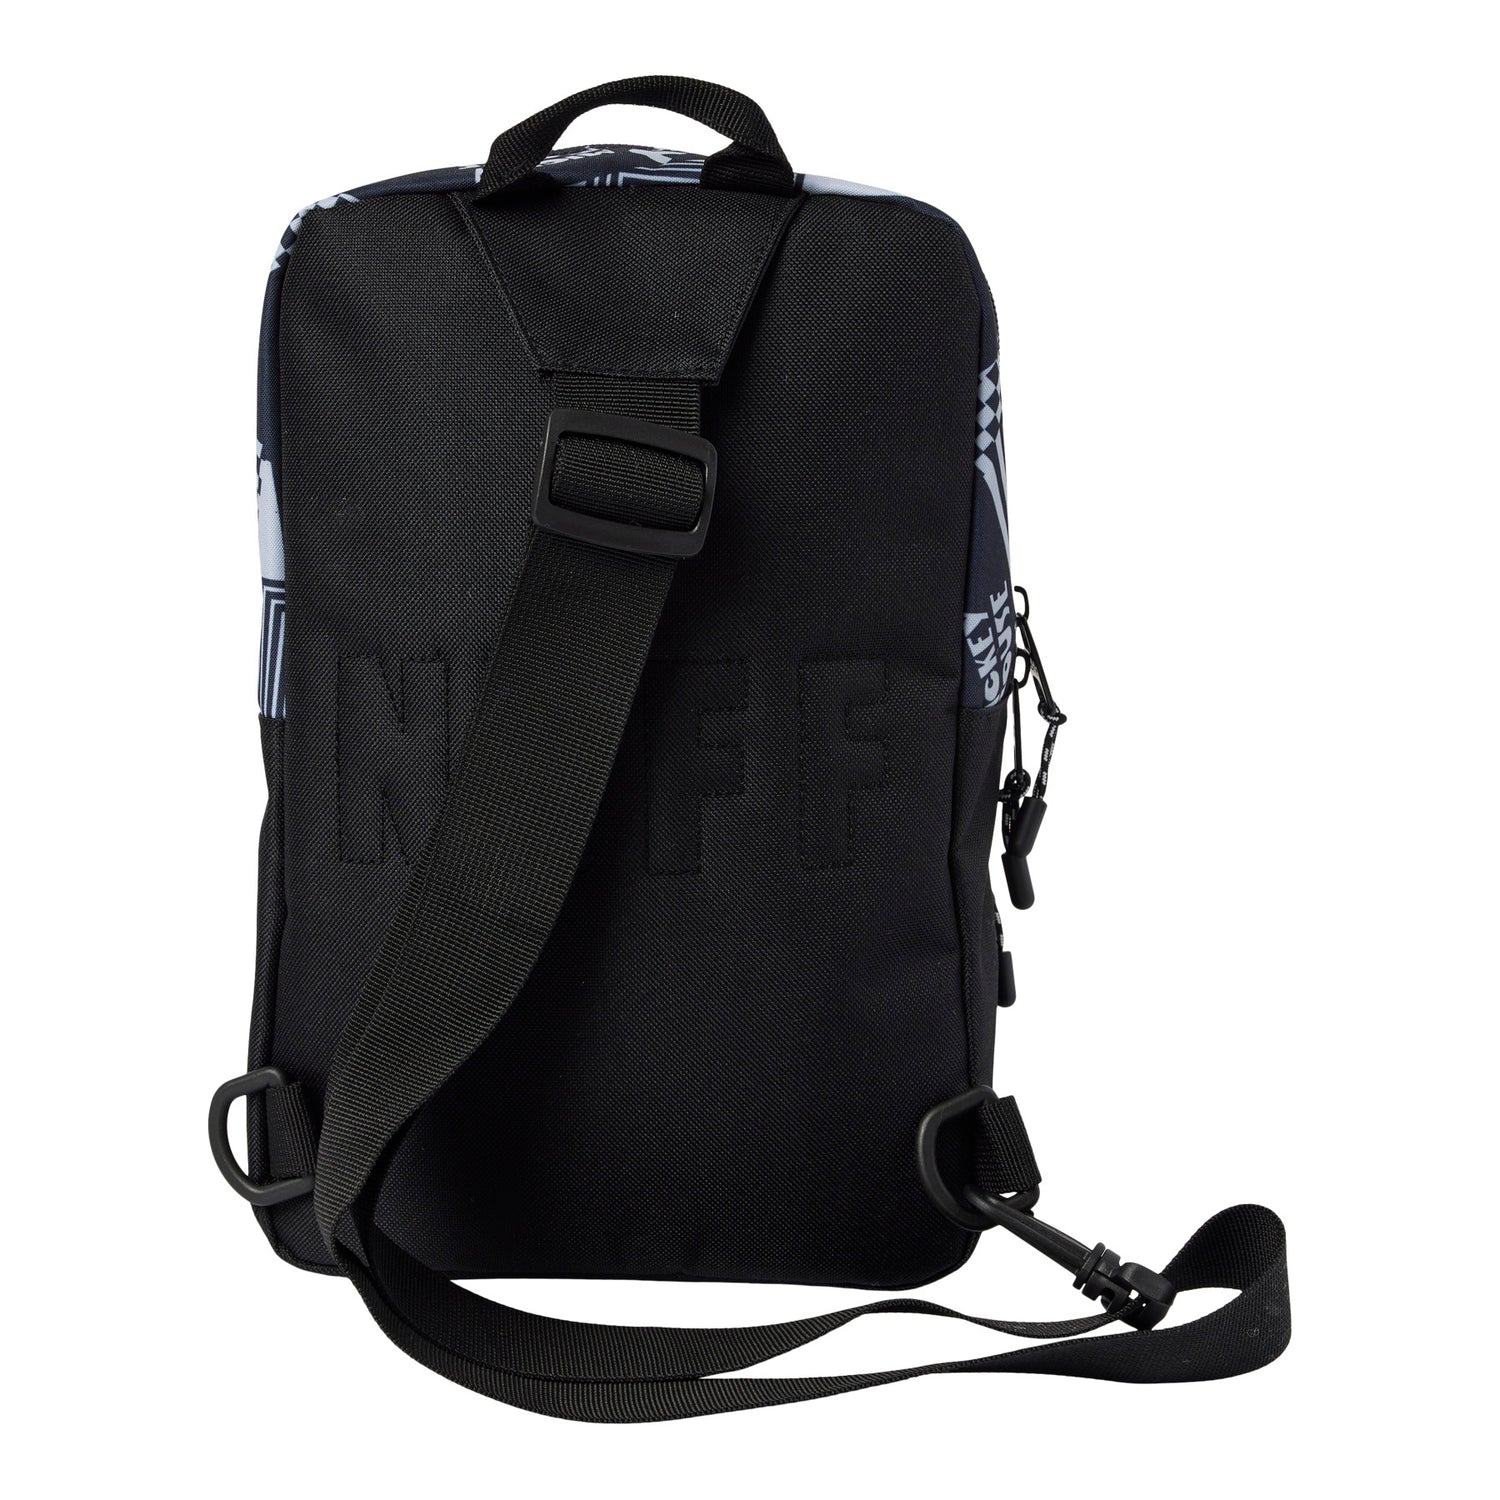 Neff Mickey Mouse Milano Backpack - Black